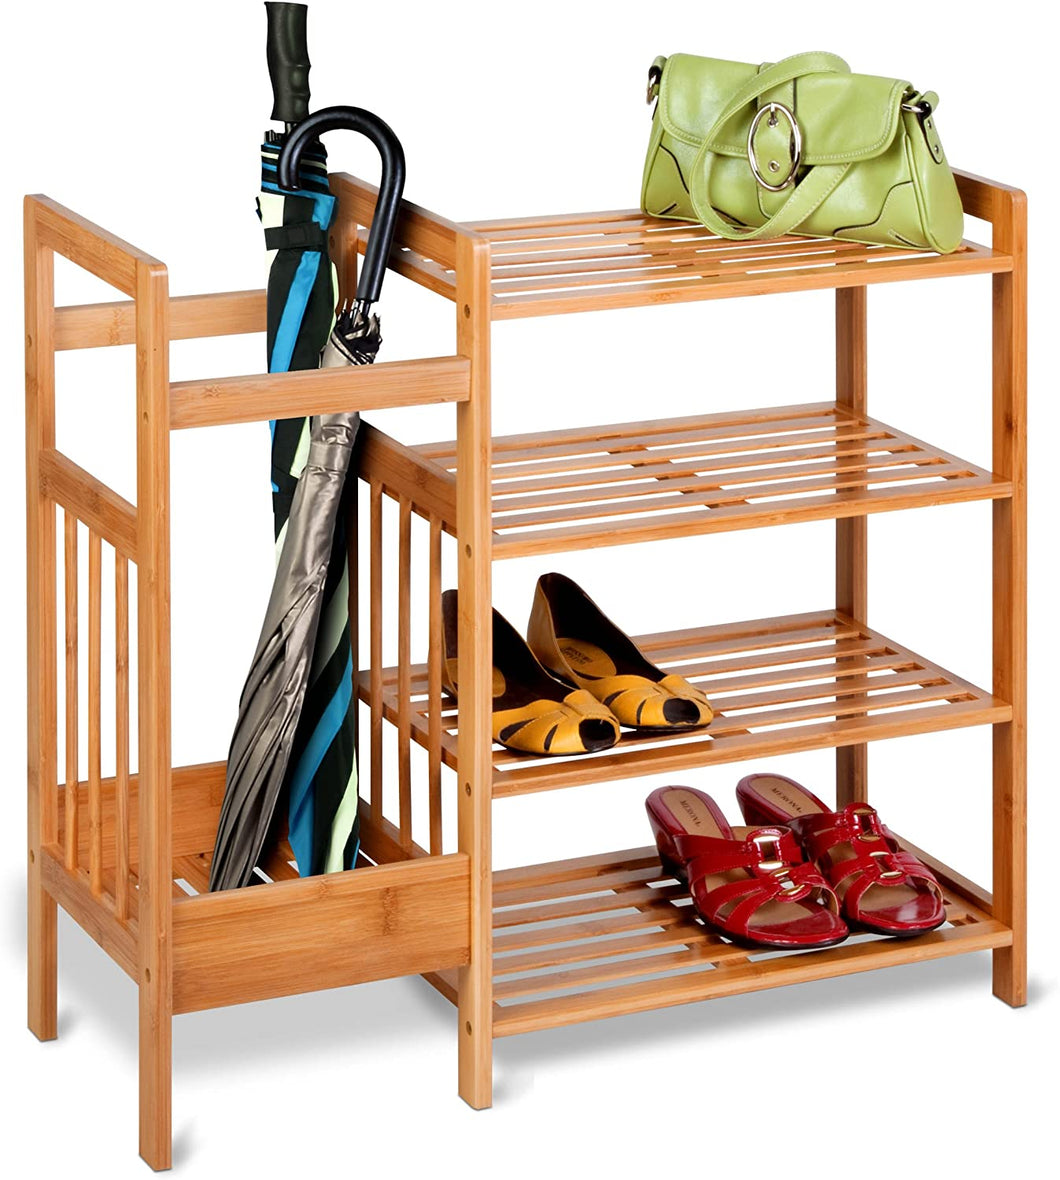 Beauty Panda® Teak Wood 4 Tier Shoe Rack Bench, Premium Shoe Organizer or Entryway Bench, Perfect for Shoe Cubby, Entry Bench, or Living Room (SH04)